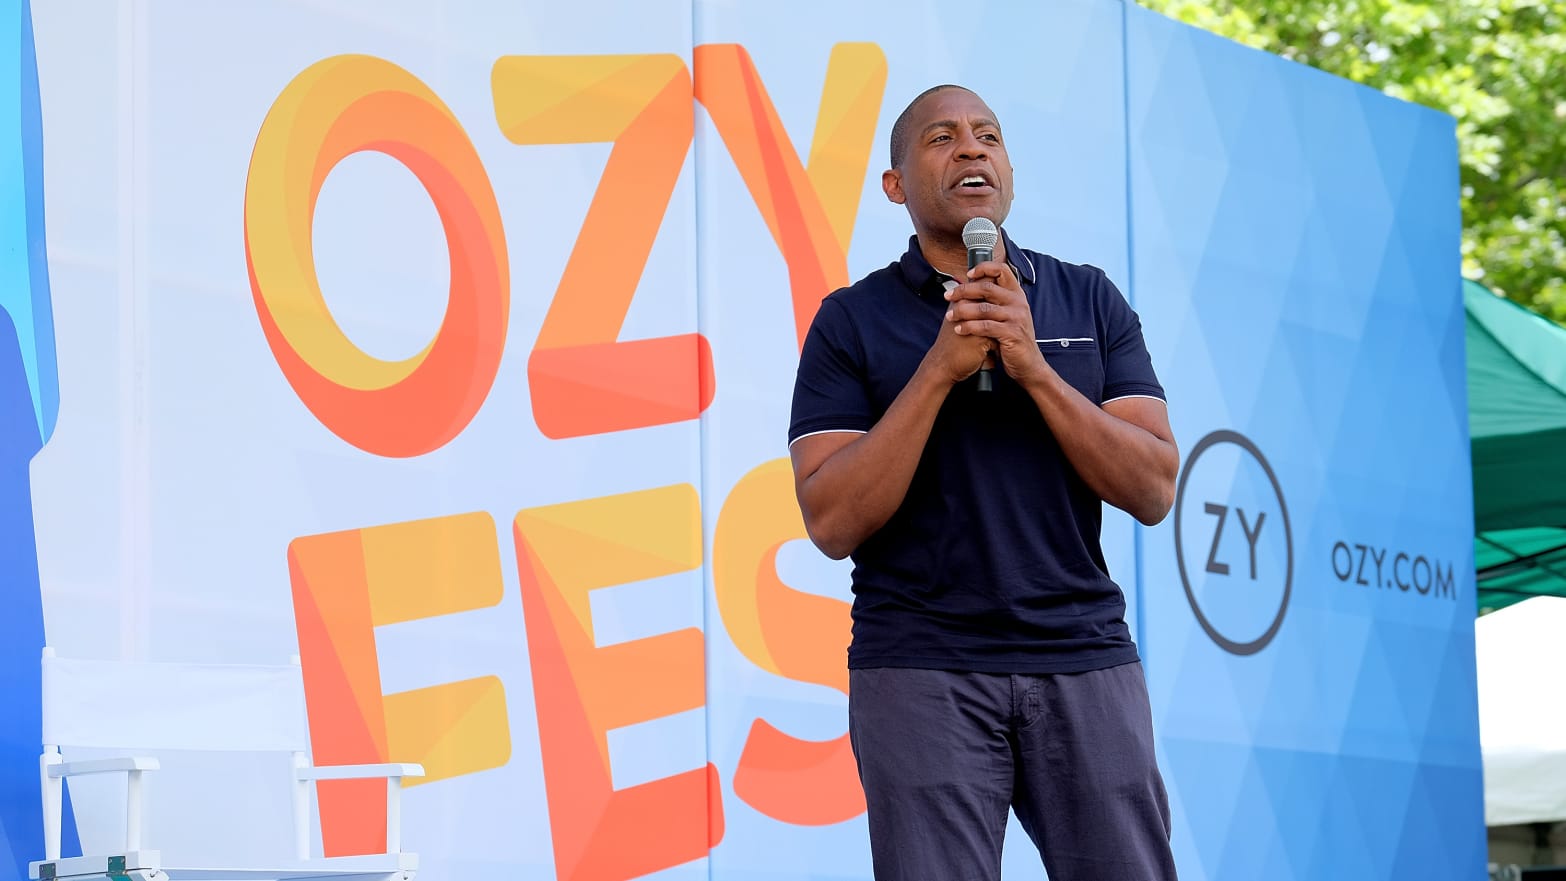 A photo of Ozy founder Carlos Watson onstage at Ozy Fest.